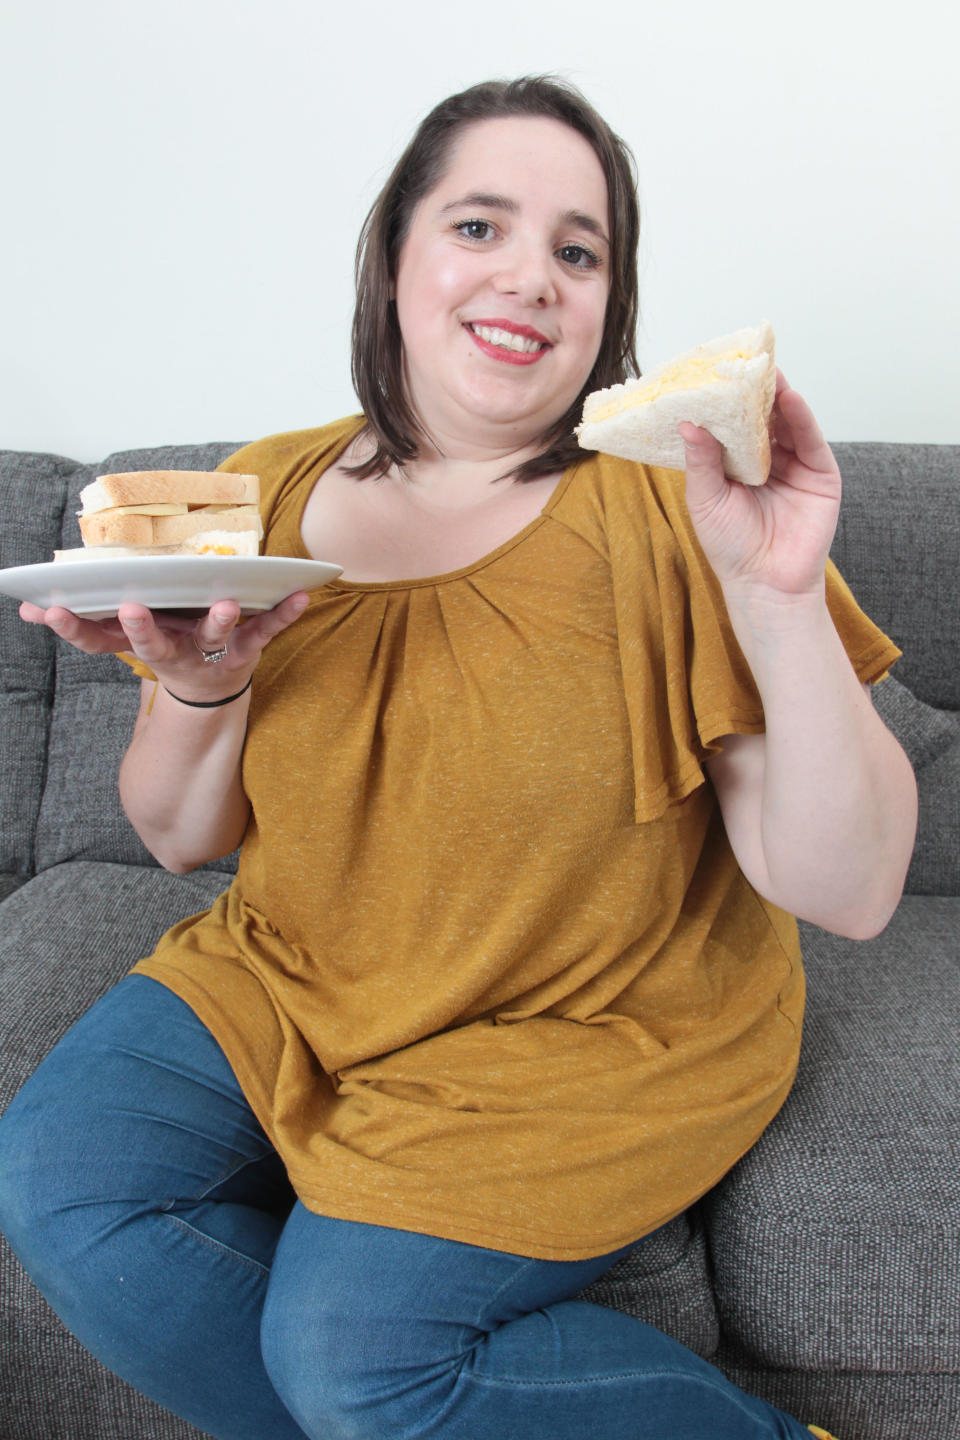 April Griffiths, 29, has an eating phobia likely developed when she was little. [Photo: SWNS]